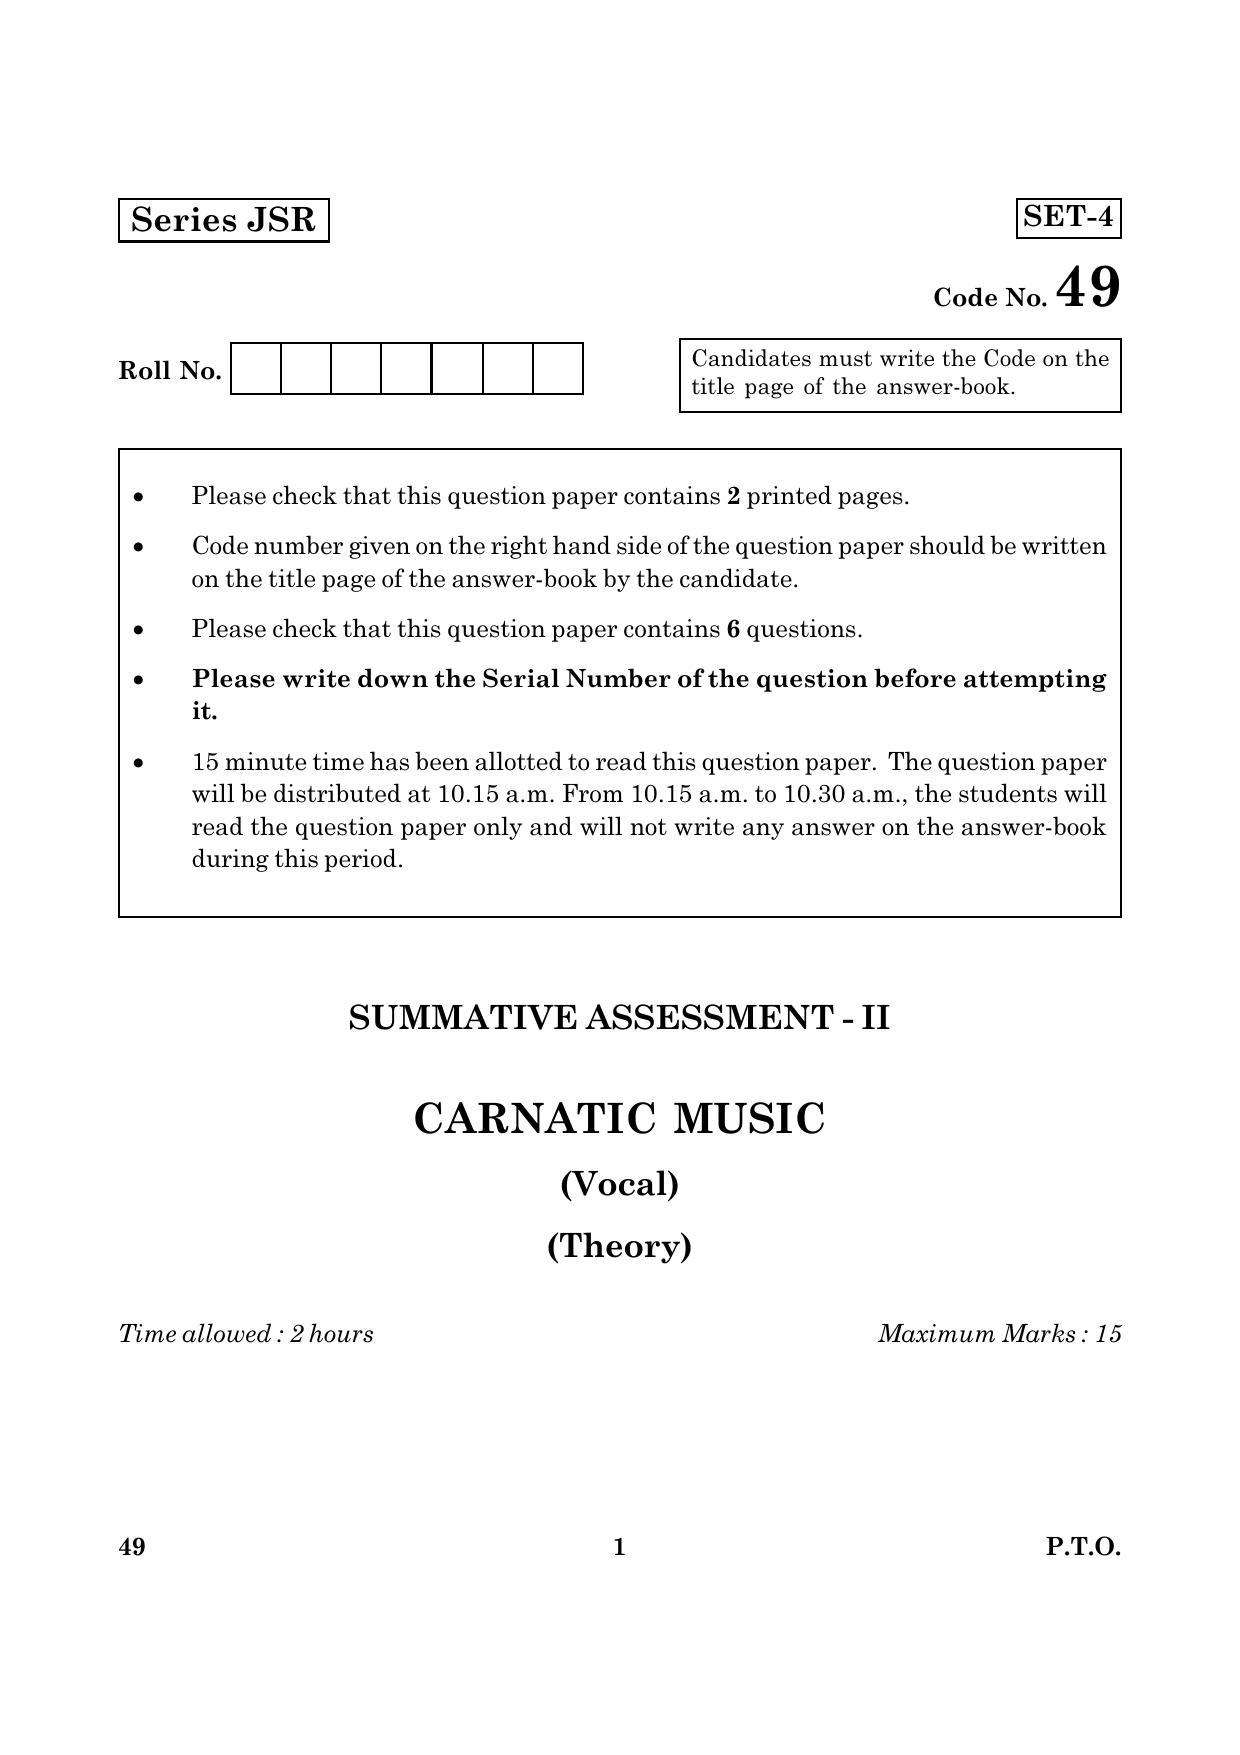 CBSE Class 10 049 Carnatic Music Vocal (Theory) 2016 Question Paper - Page 1